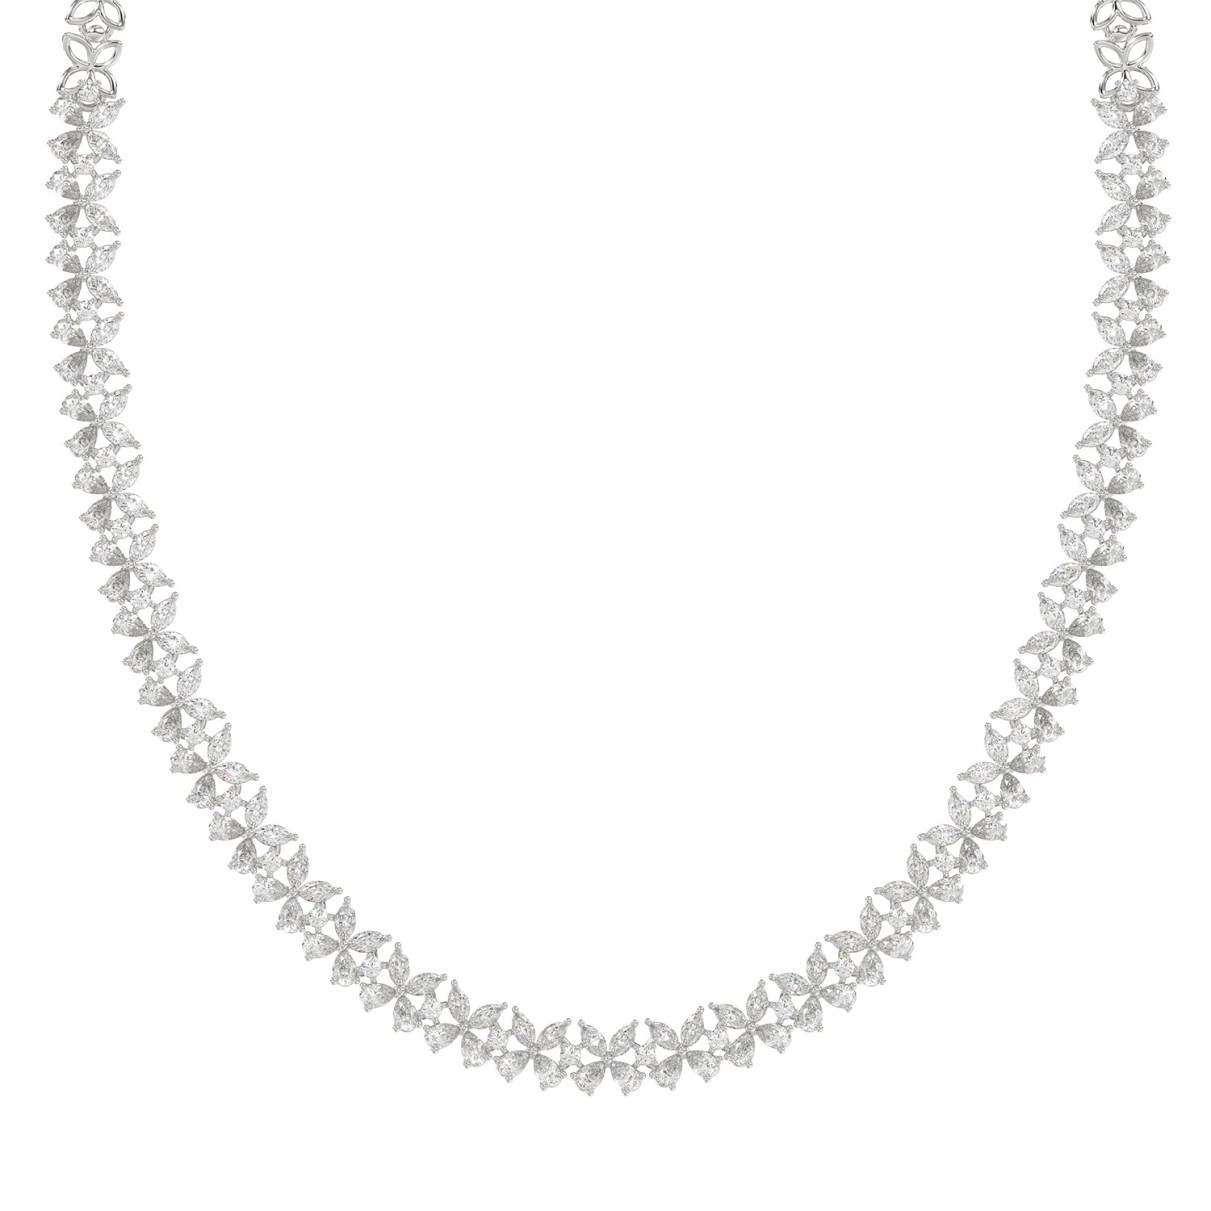 LADIES NECKLACE 19 1/2CT ROUND/PEAR/MARQUISE DIAMOND 14K WHITE GOLD